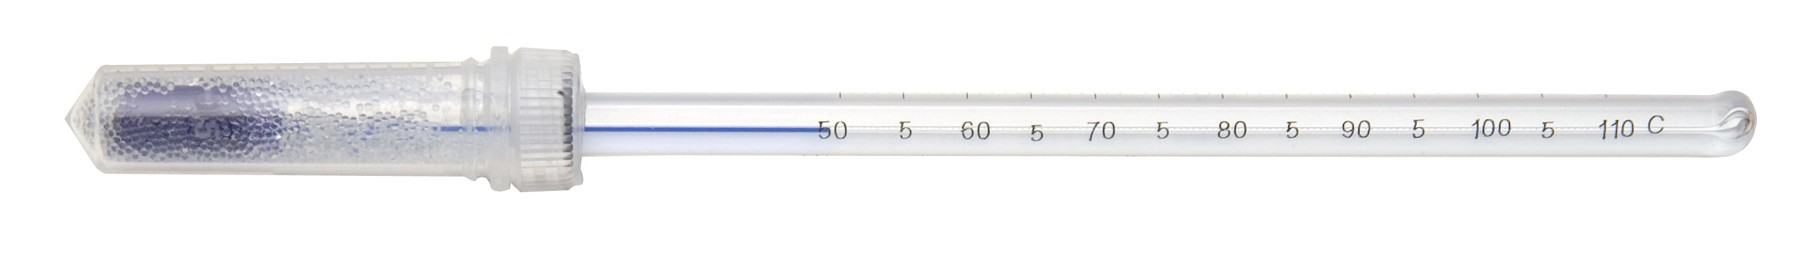 H-B DURAC Plus Dry Block/Incubator Liquid-In-Glass Thermometer; 18 to 60C, PFA Safety Coated; 35mm Immersion, Organic Liquid Fill